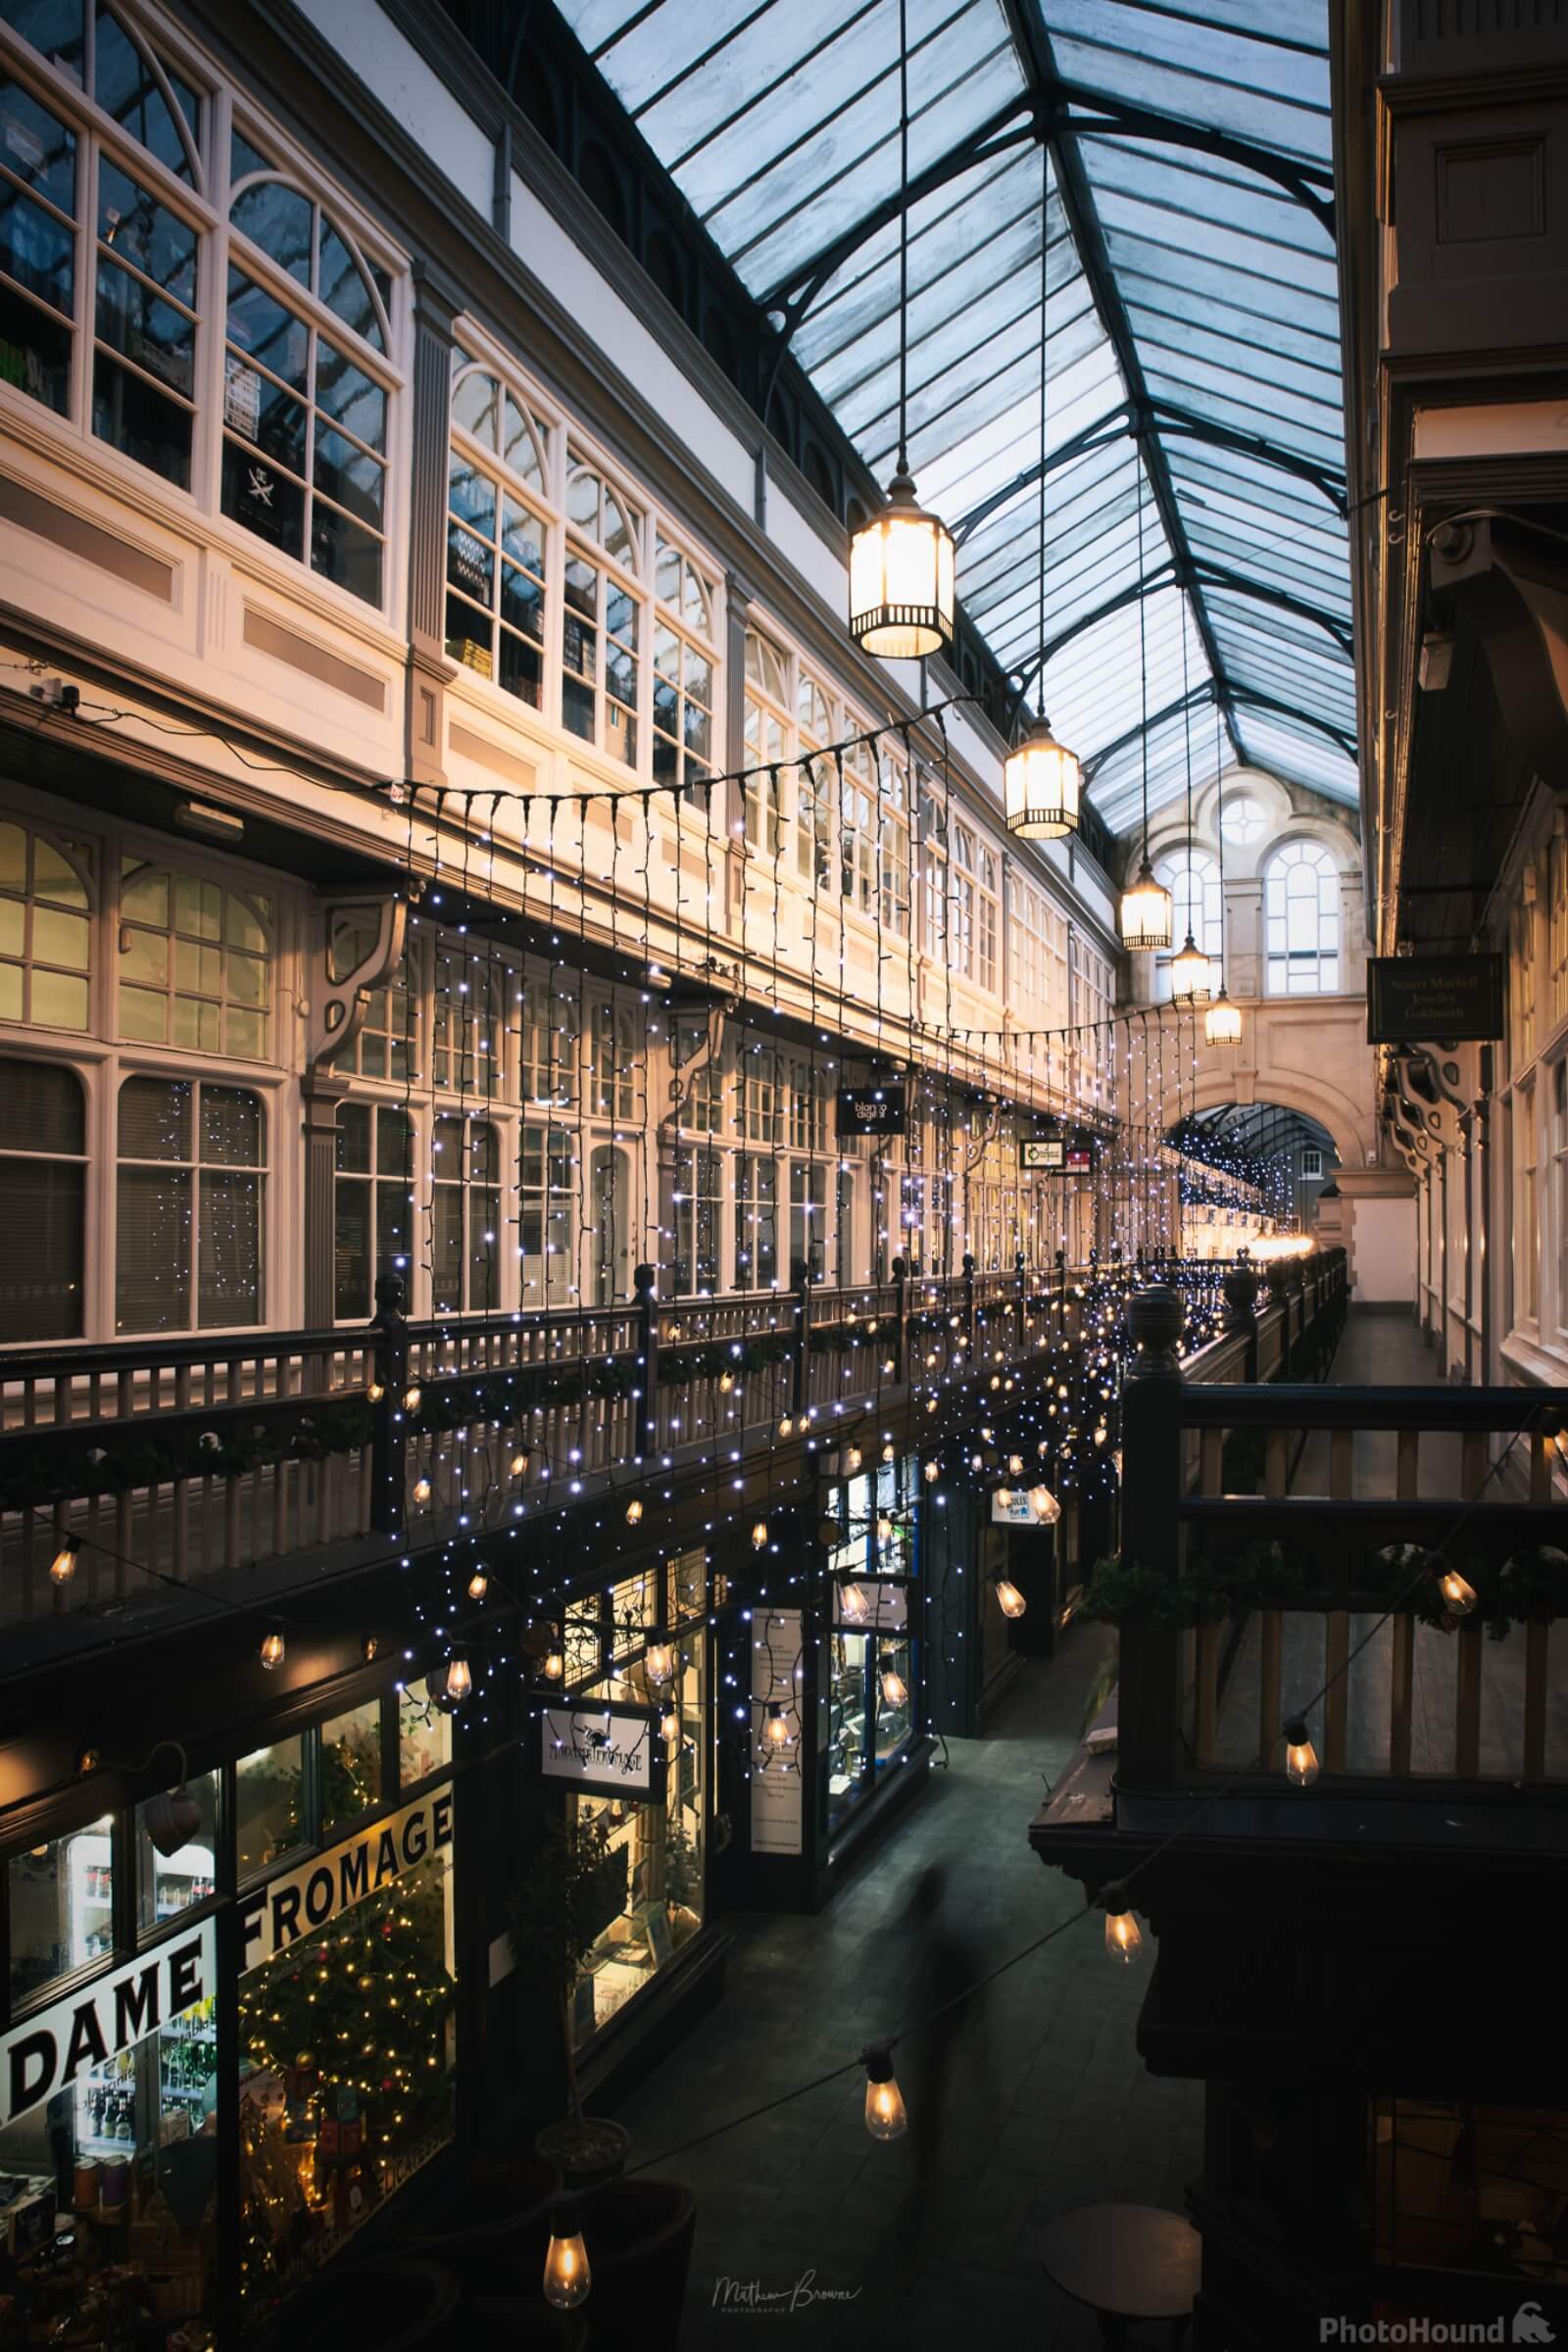 Image of Castle Arcade by Mathew Browne